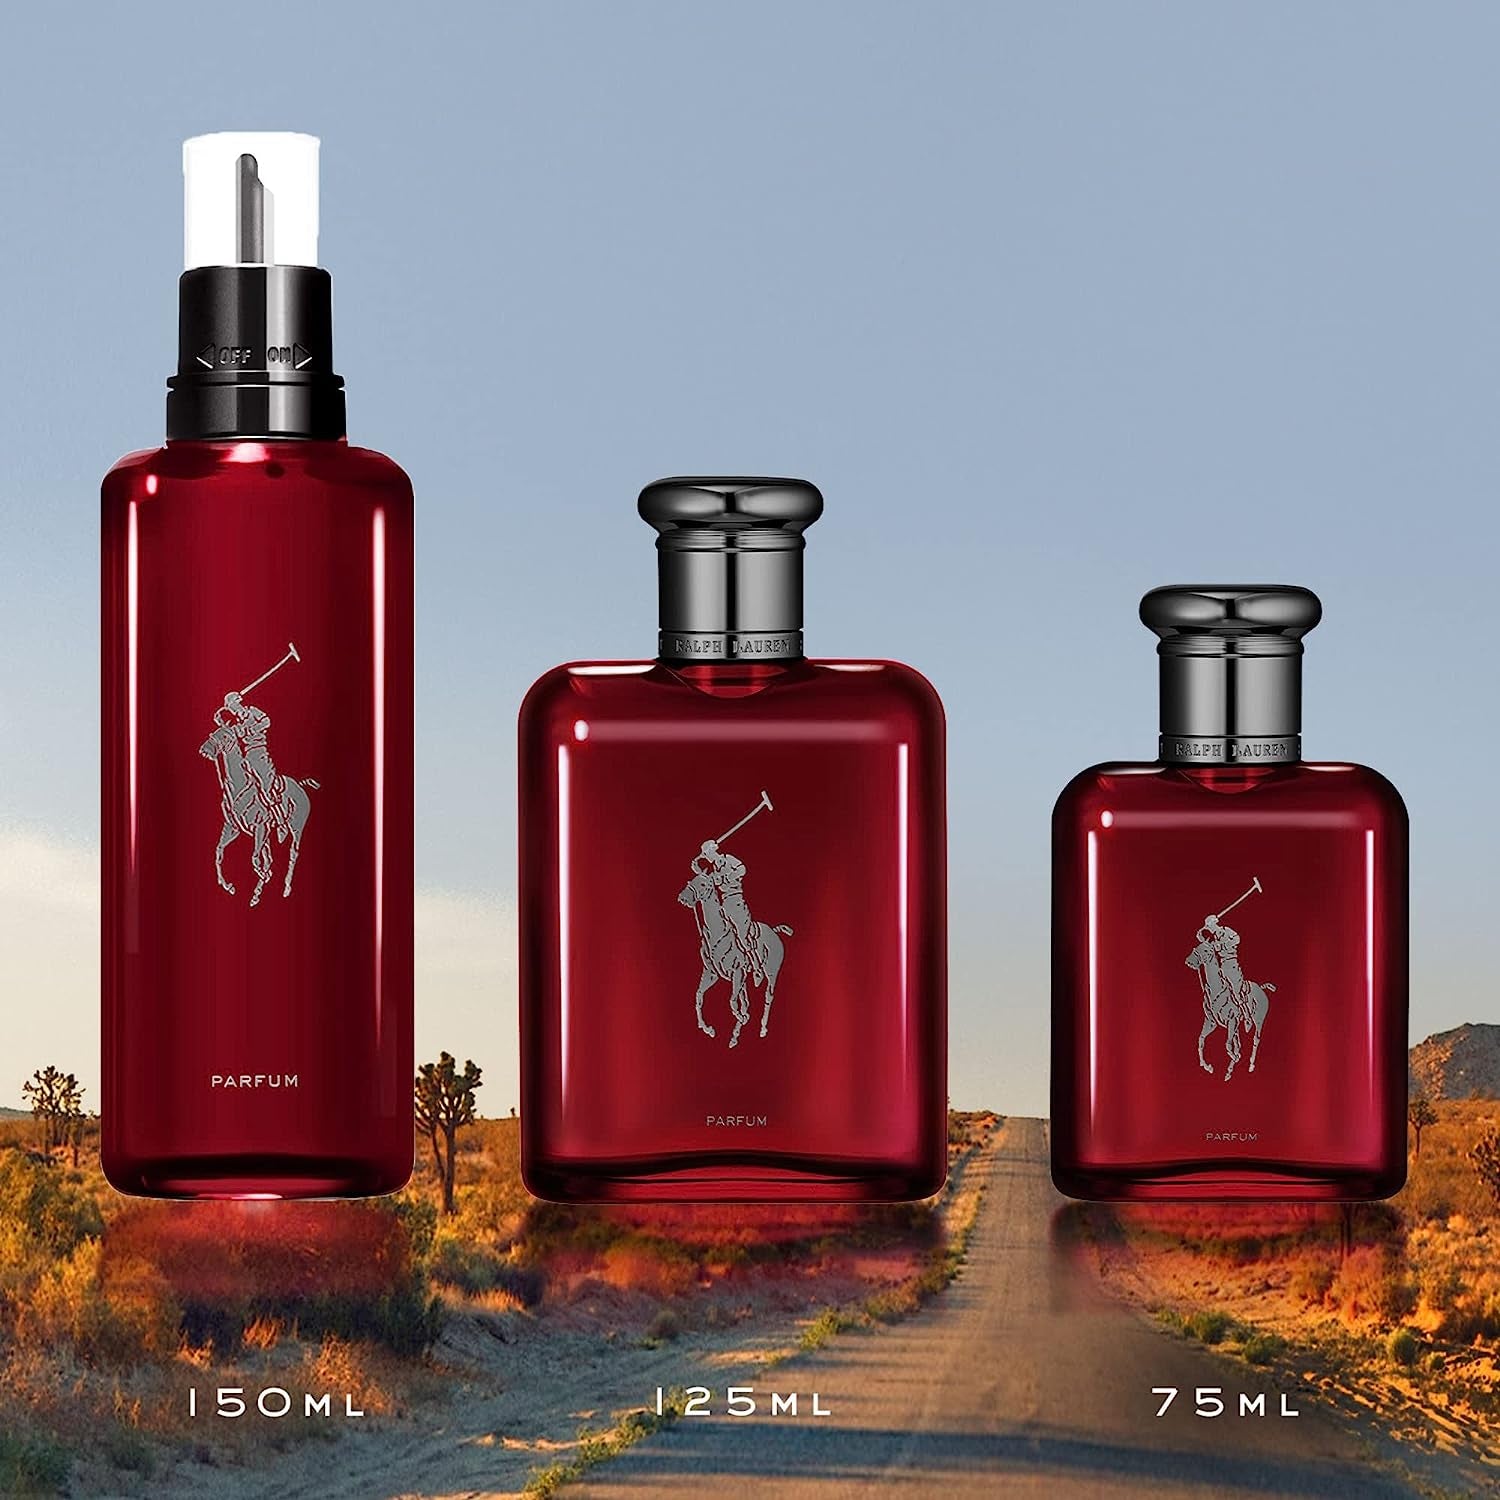 Ralph Lauren - Polo Red - Parfum - Men's Cologne - Ambery & Woody - With Absinthe, Cedarwood, and Musk - Intense Fragrance